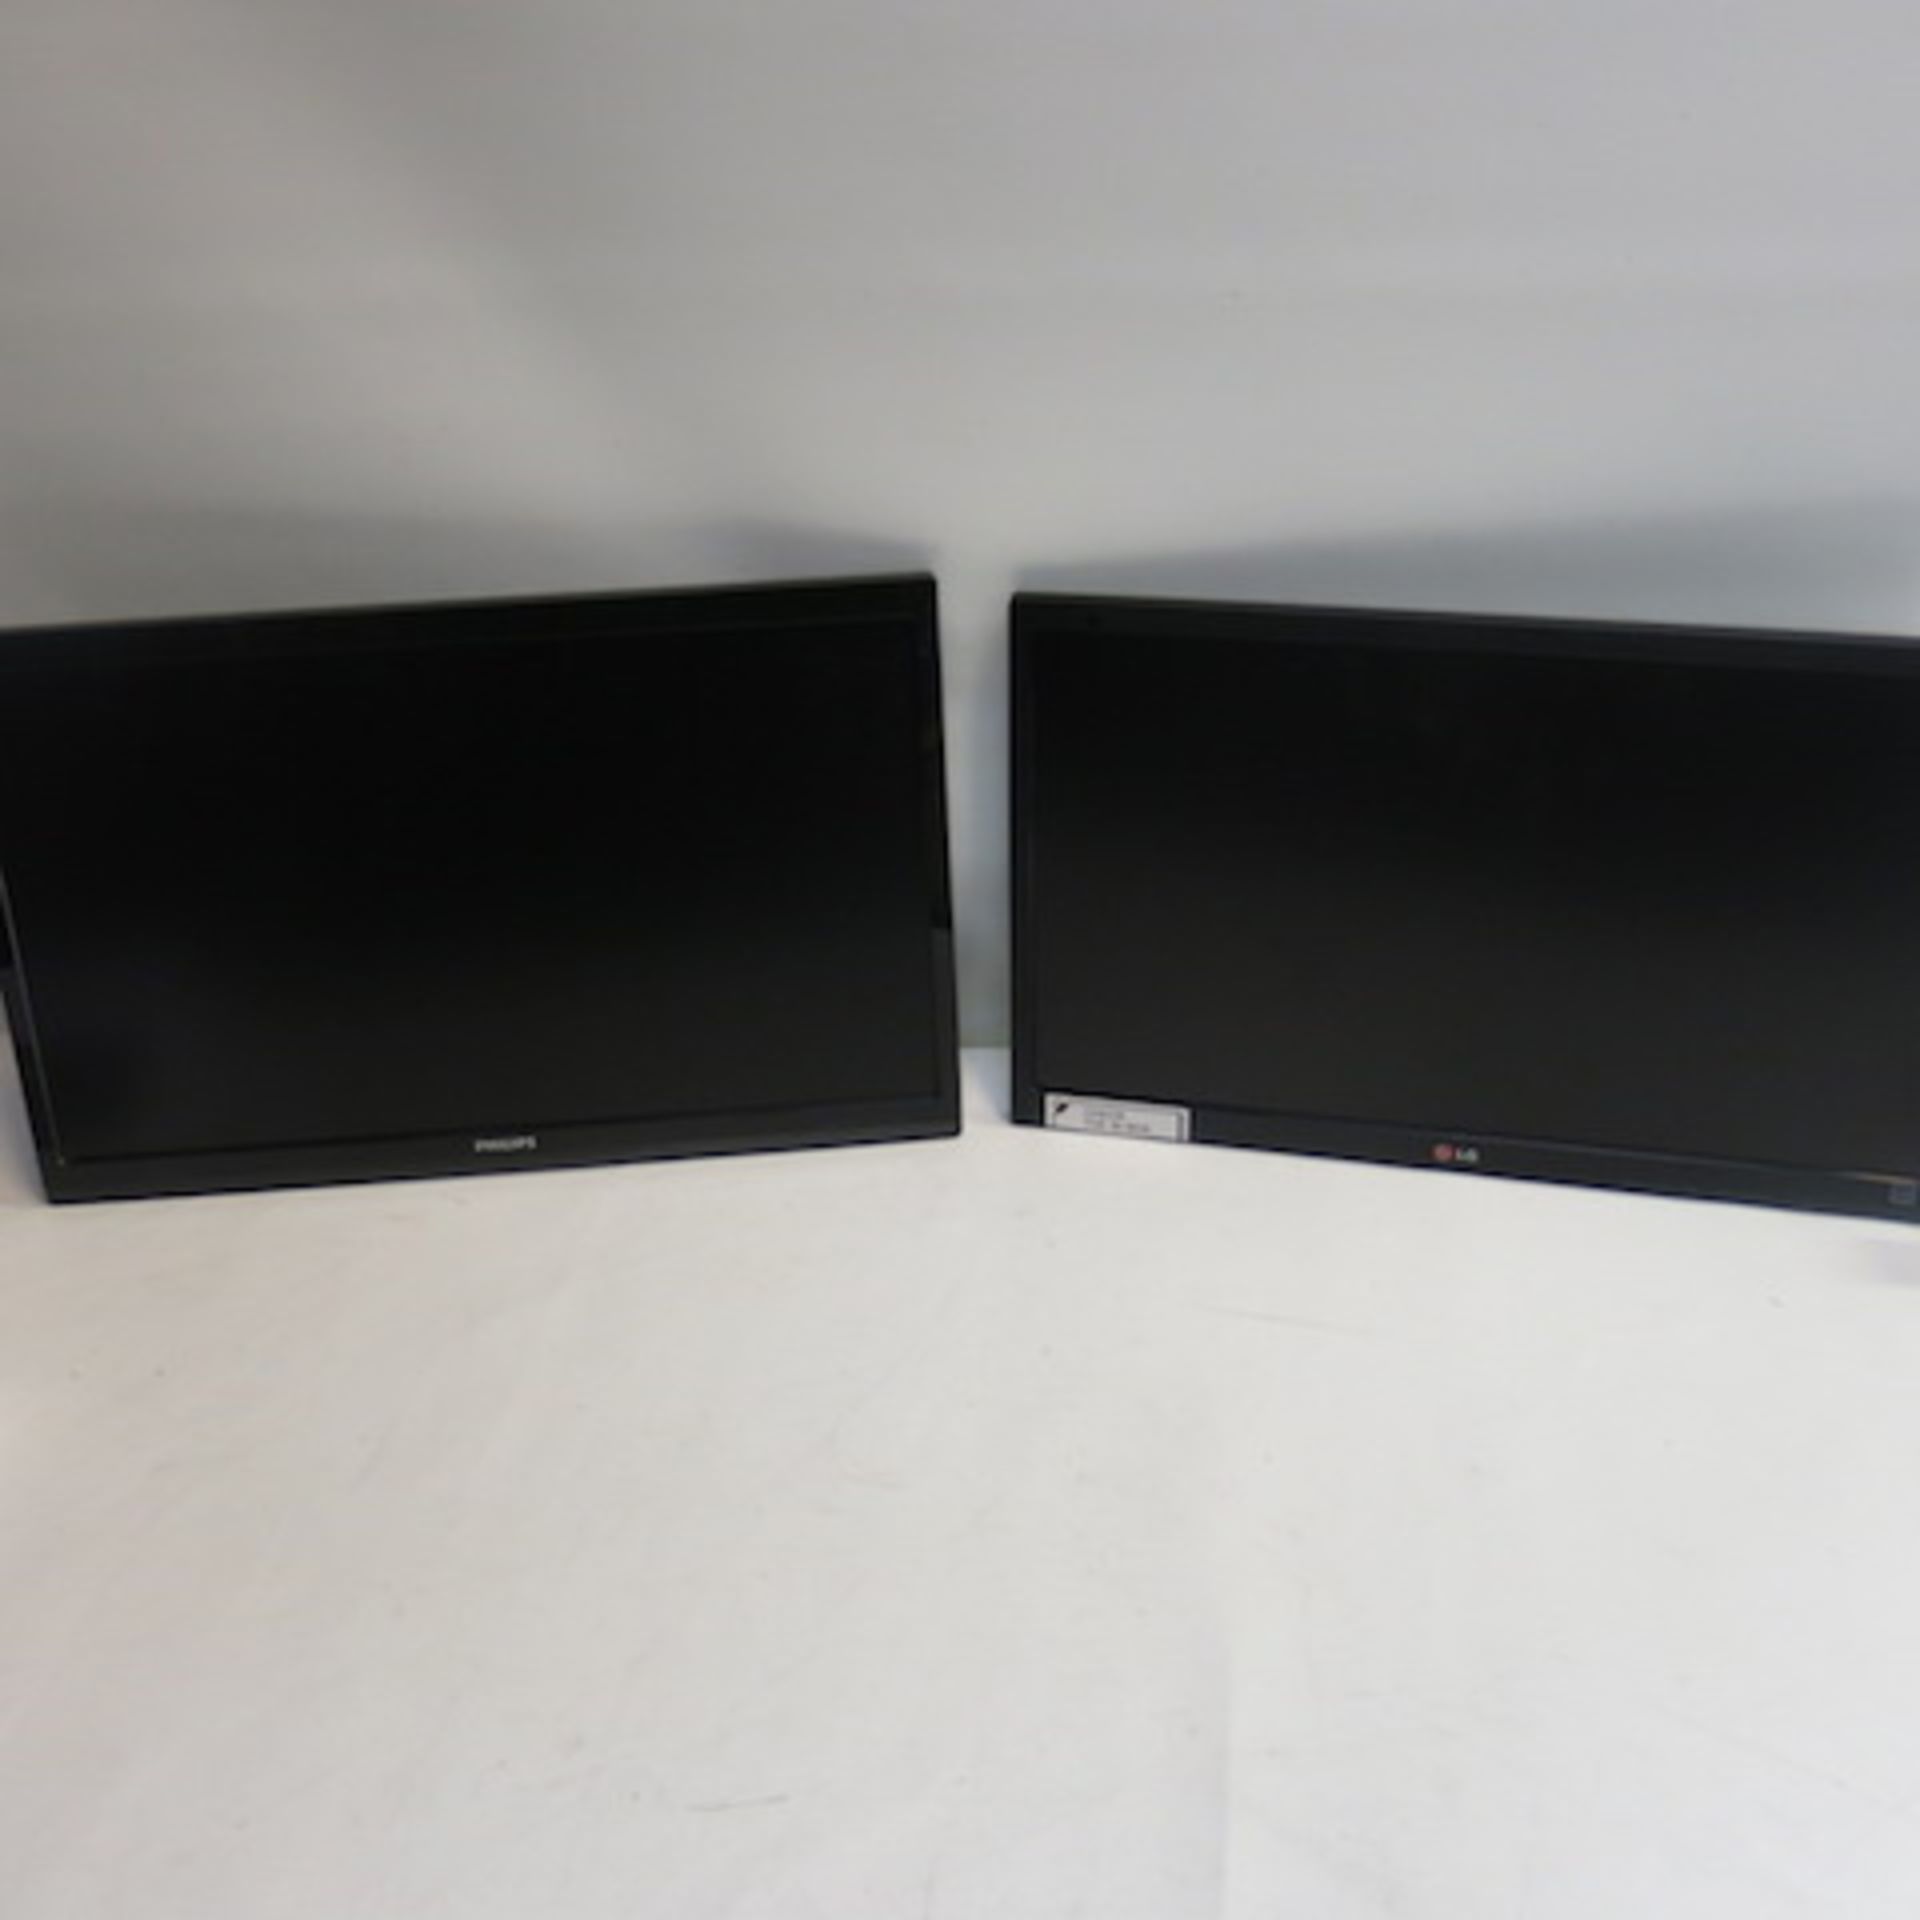 1 x Philips 24" & 1 x LG 23" TFT Monitors with Power & AV Cables